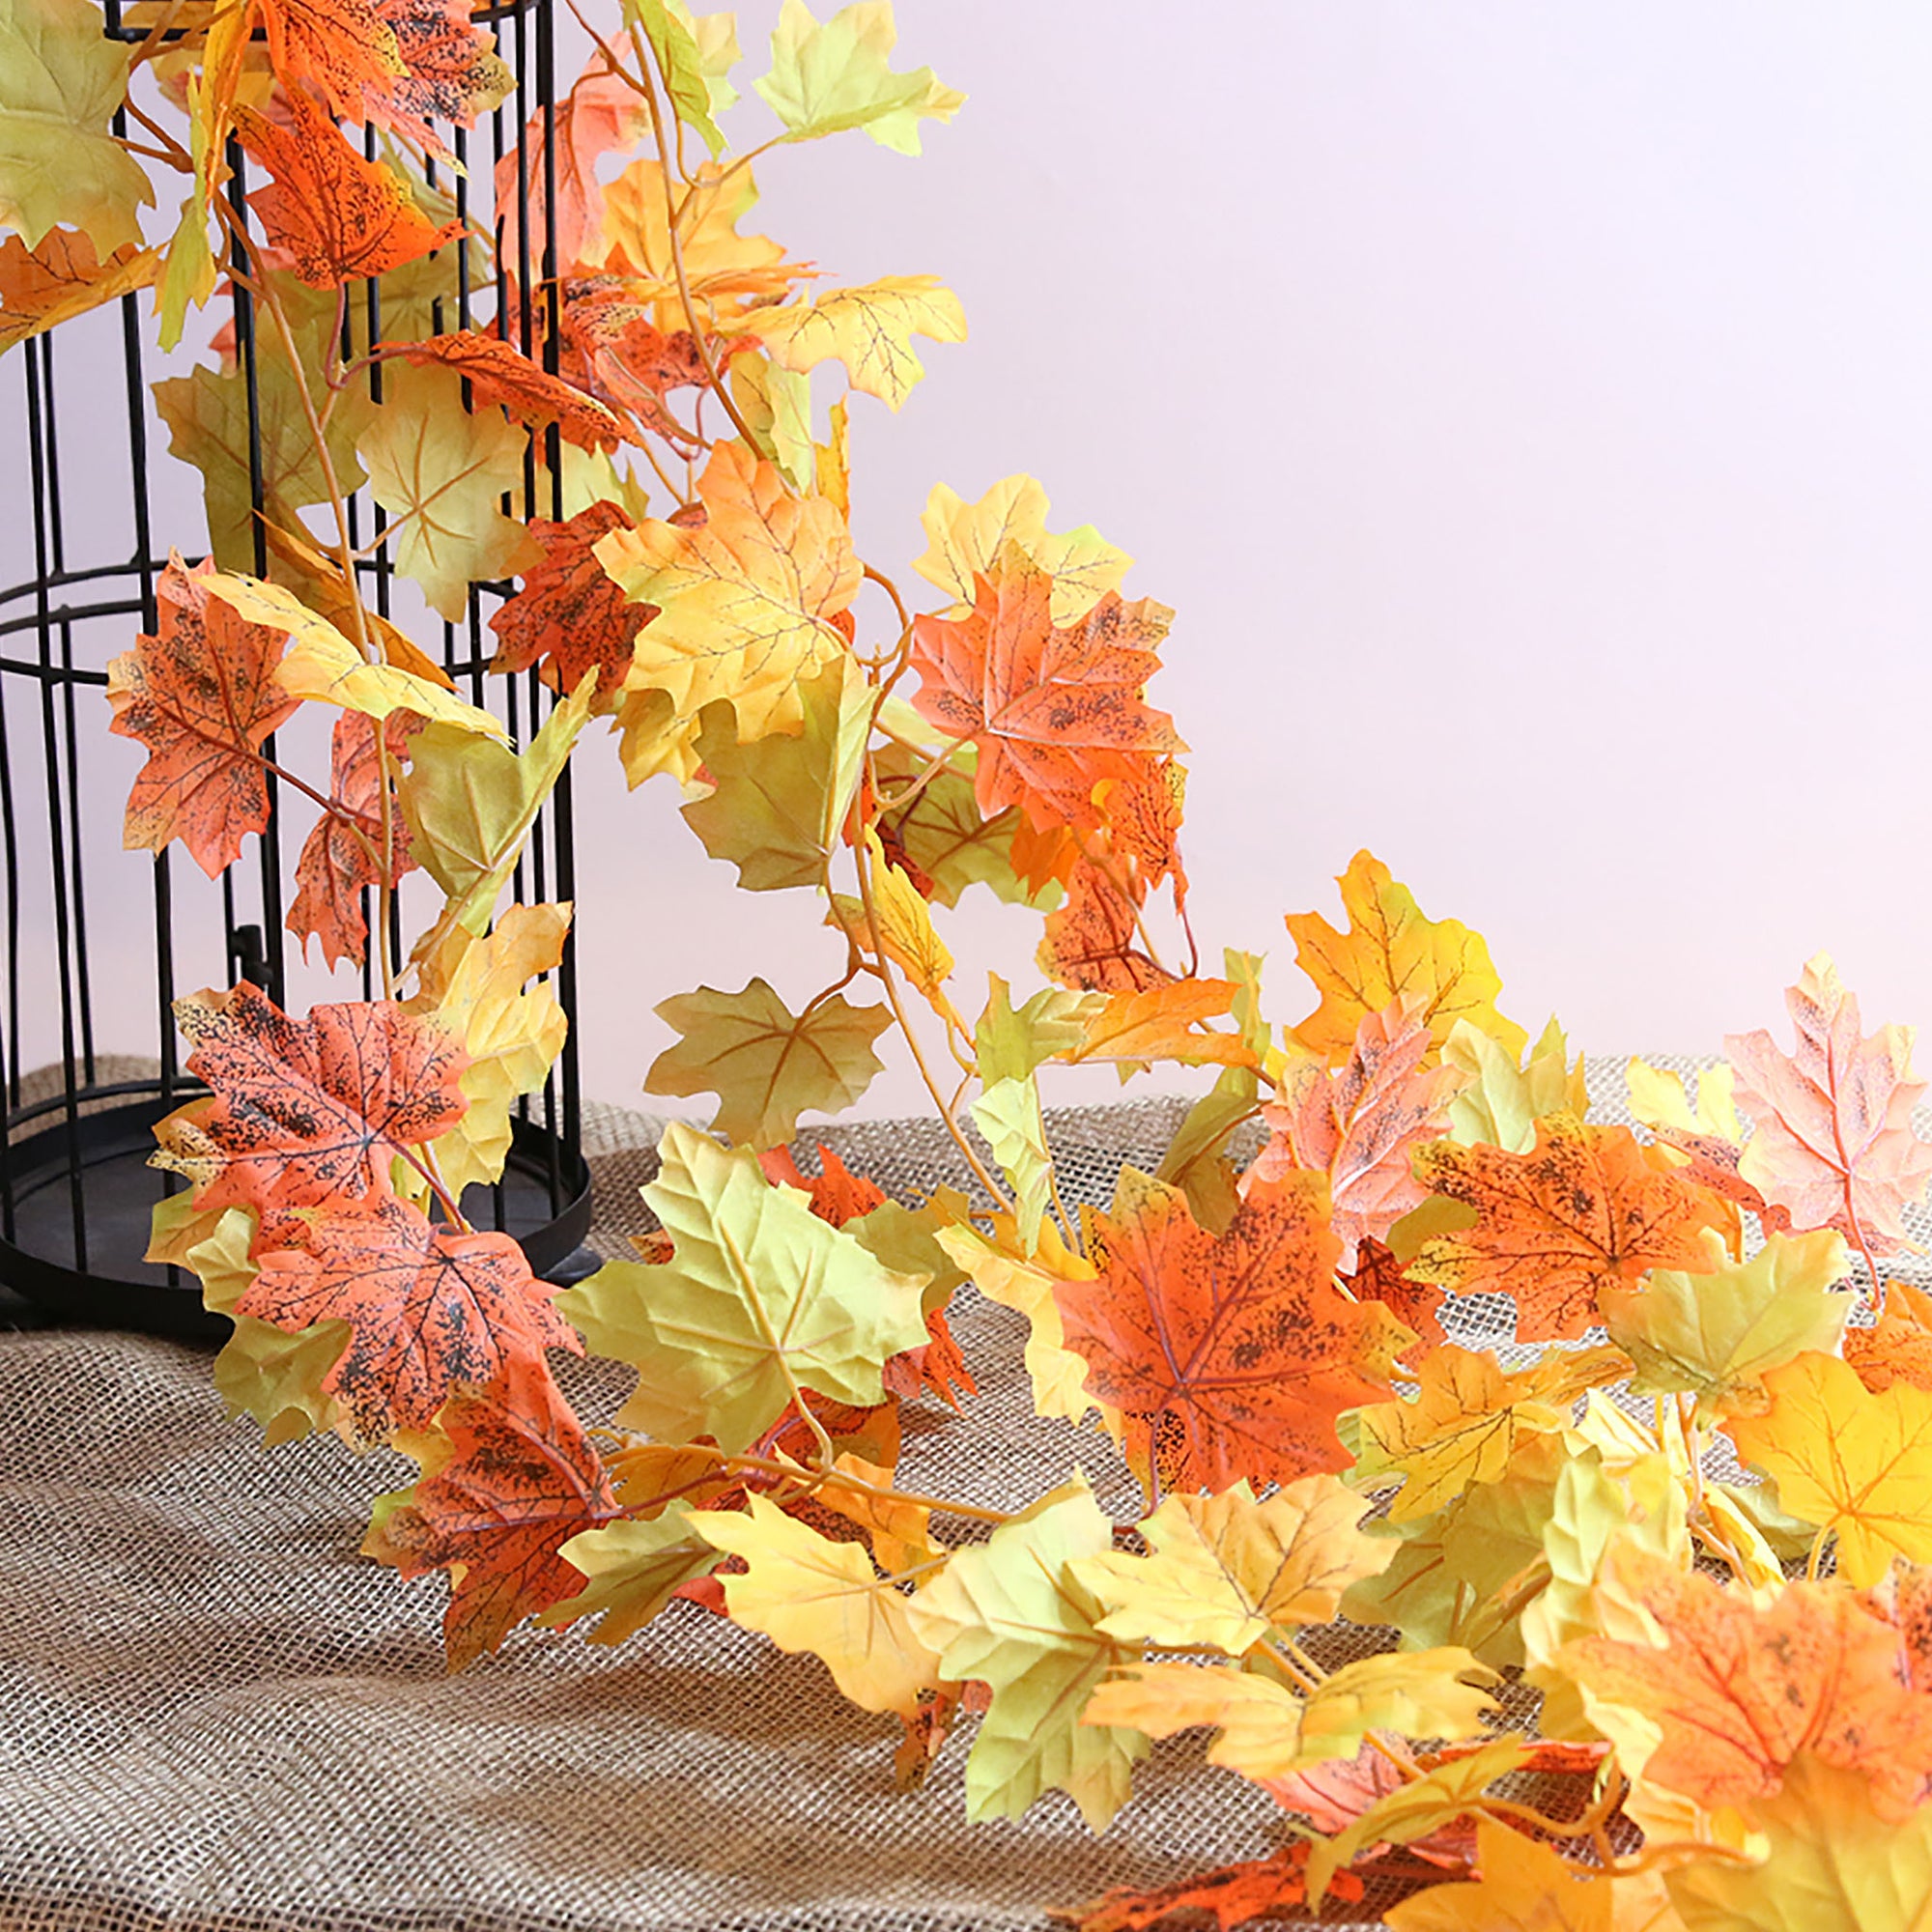 Artificial Fall Maple Leaf Garland for Home Decor